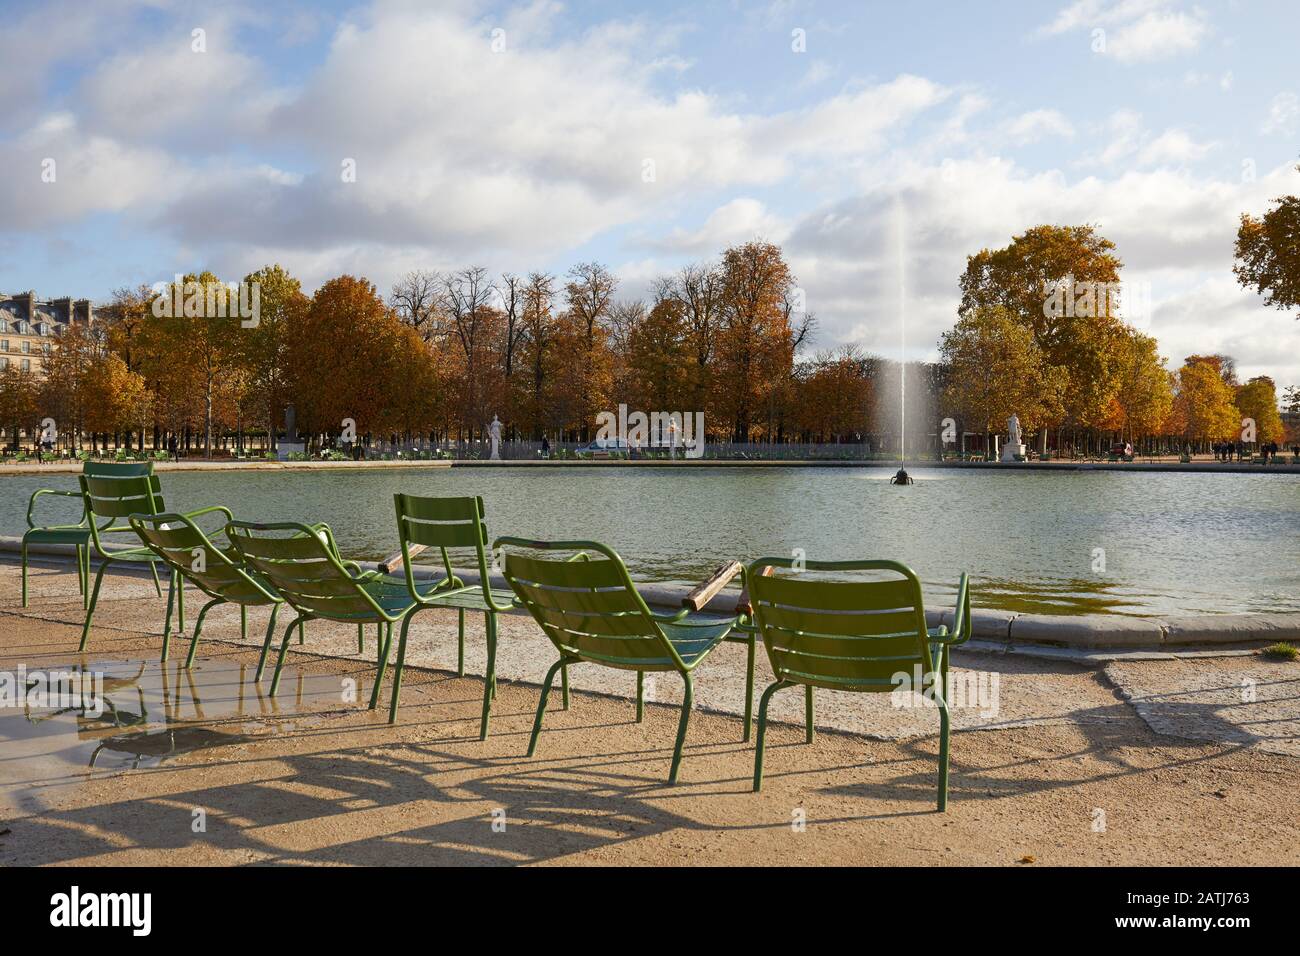 PARIS - NOVEMBER 7, 2019: Tuileries garden with empty metal chairs and fountain in a sunny autumn day in Paris Stock Photo